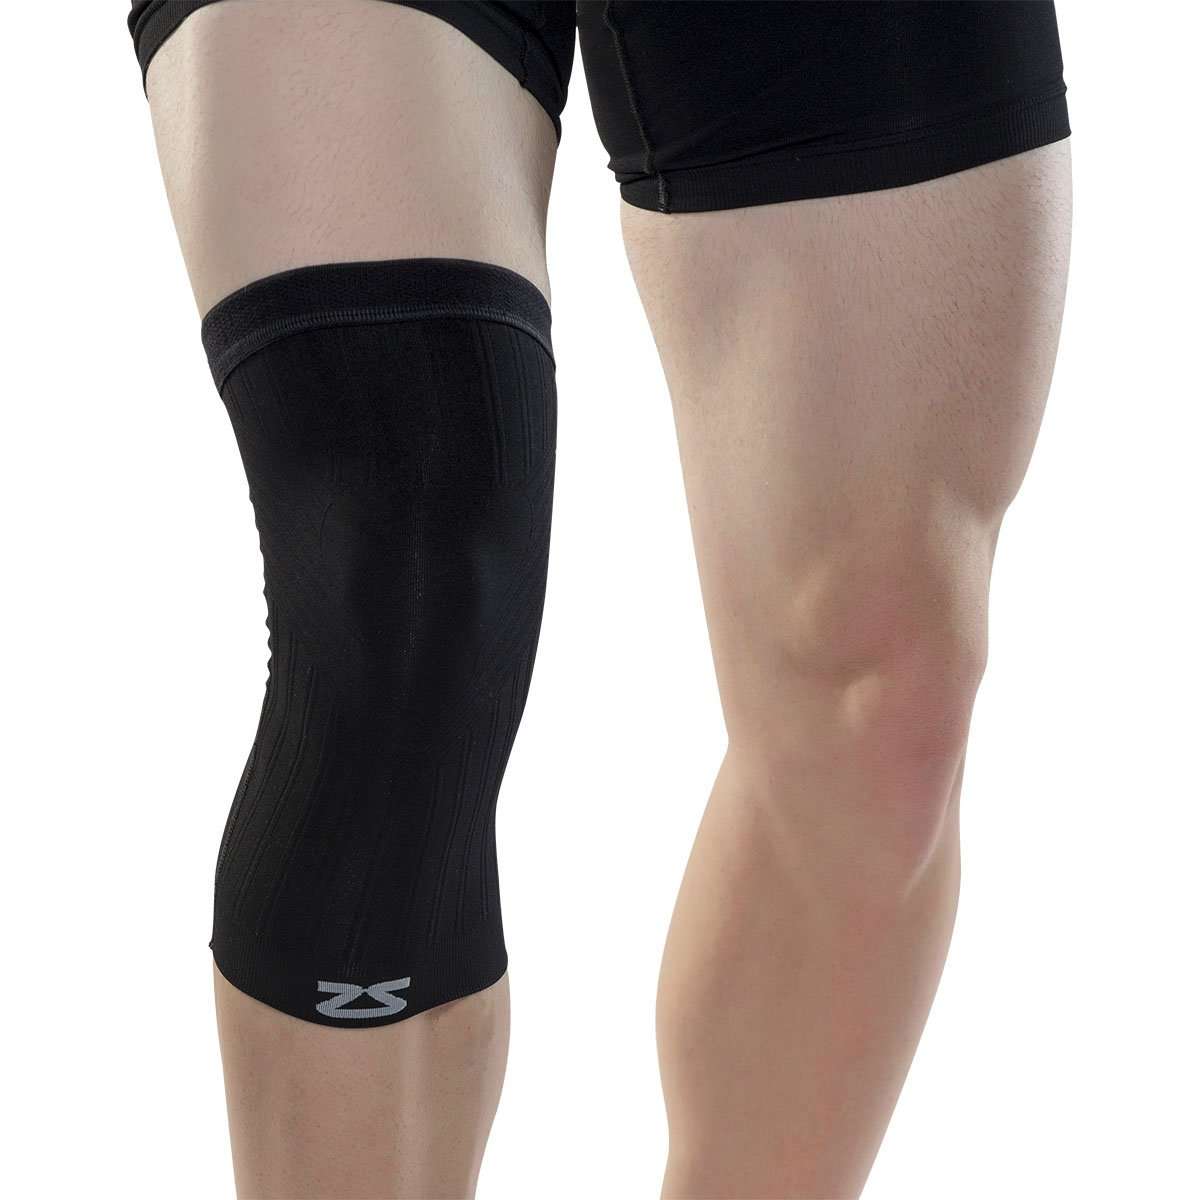 What are knee sleeves and where they are used?